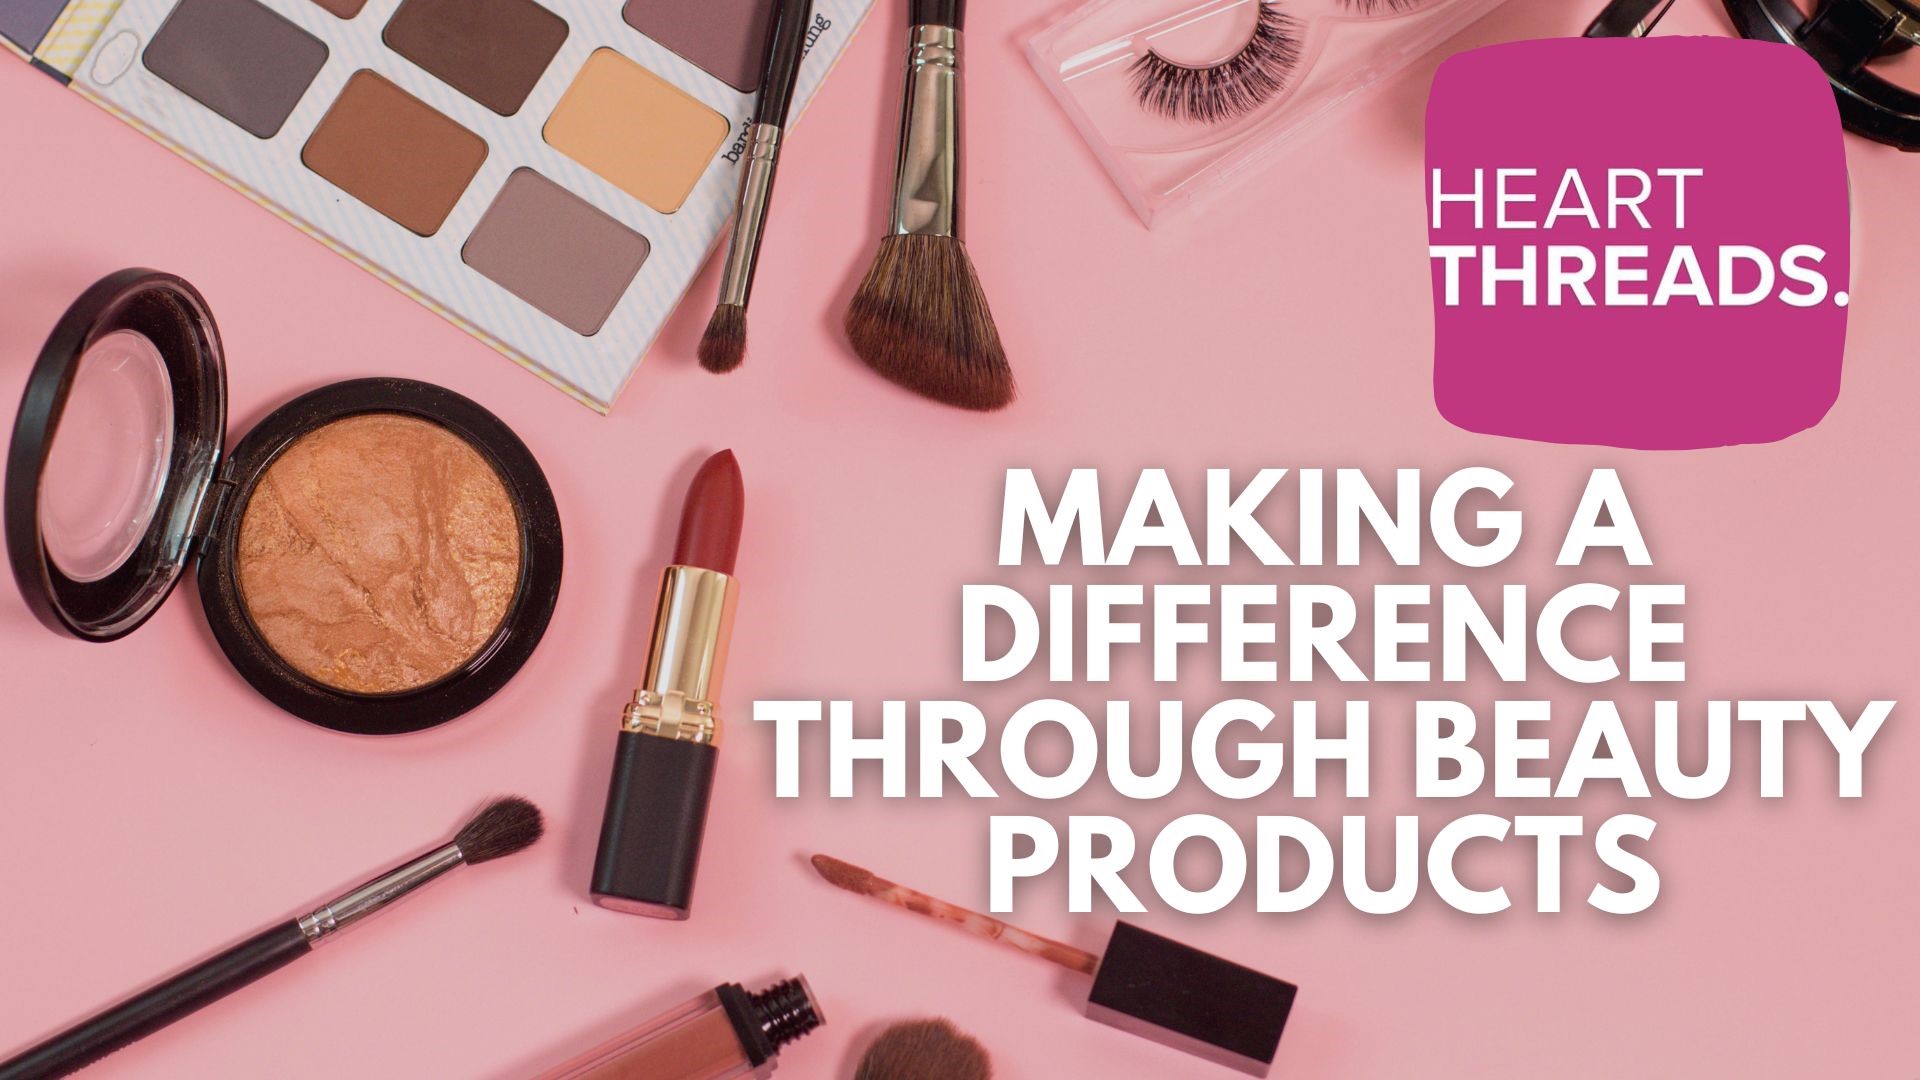 A collection of inspiring stories showcasing entrepreneurs behind beauty products and the positive impact they're having on their communities.